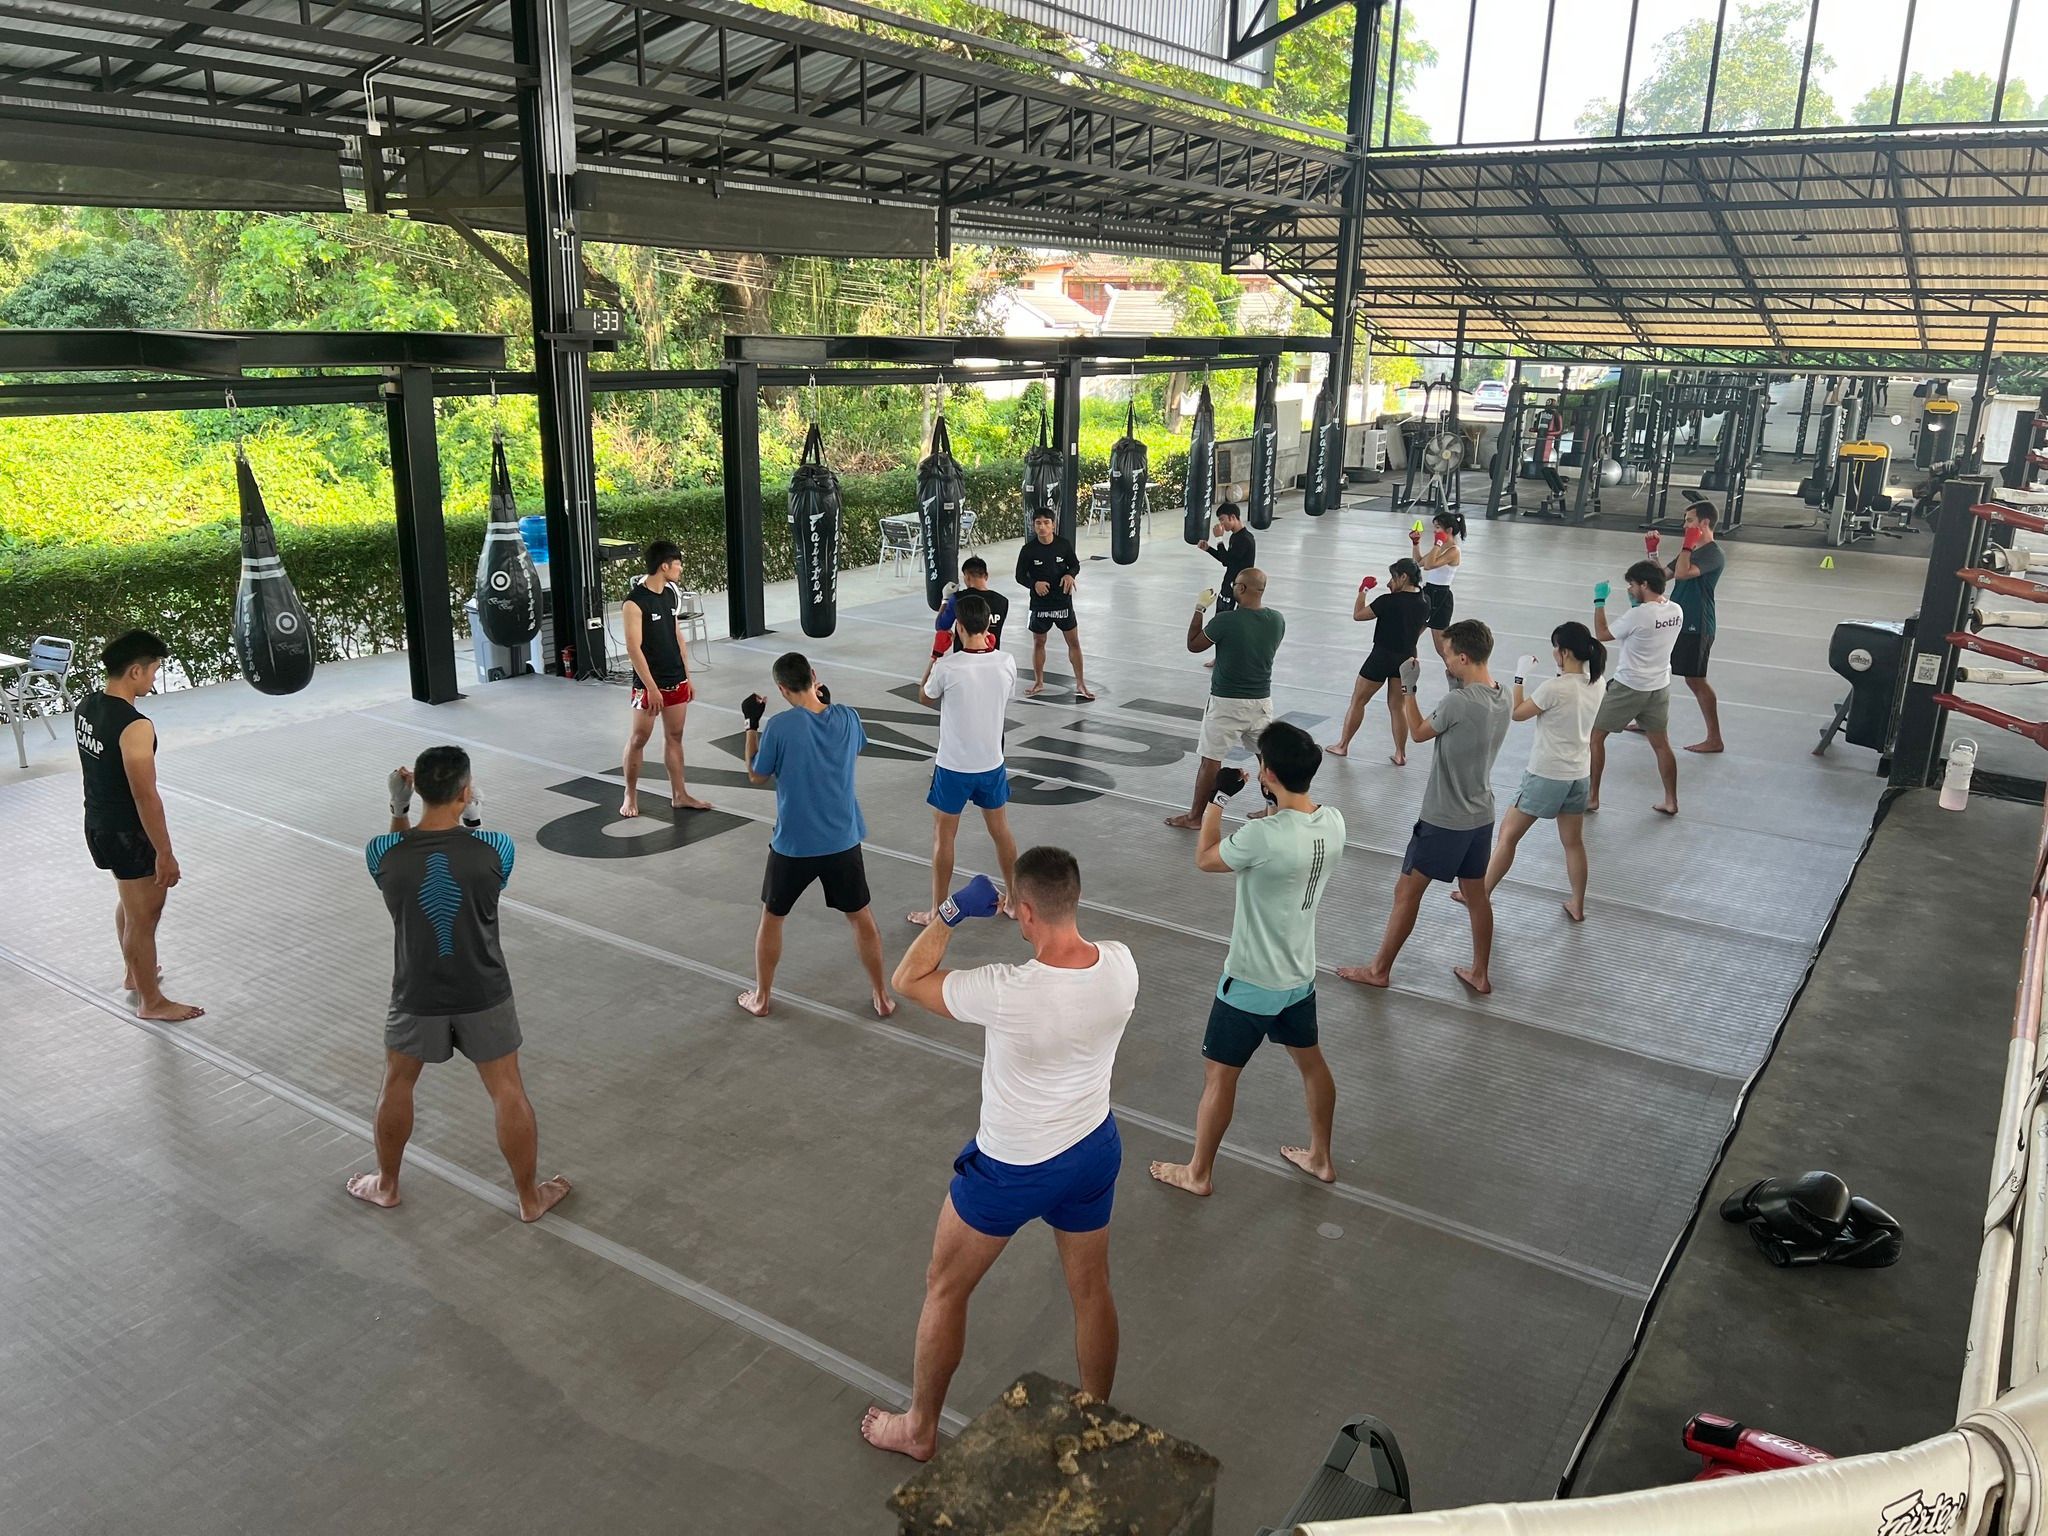 Group training at The Camp Muay Thai Resort and Academy in Chiang Mai